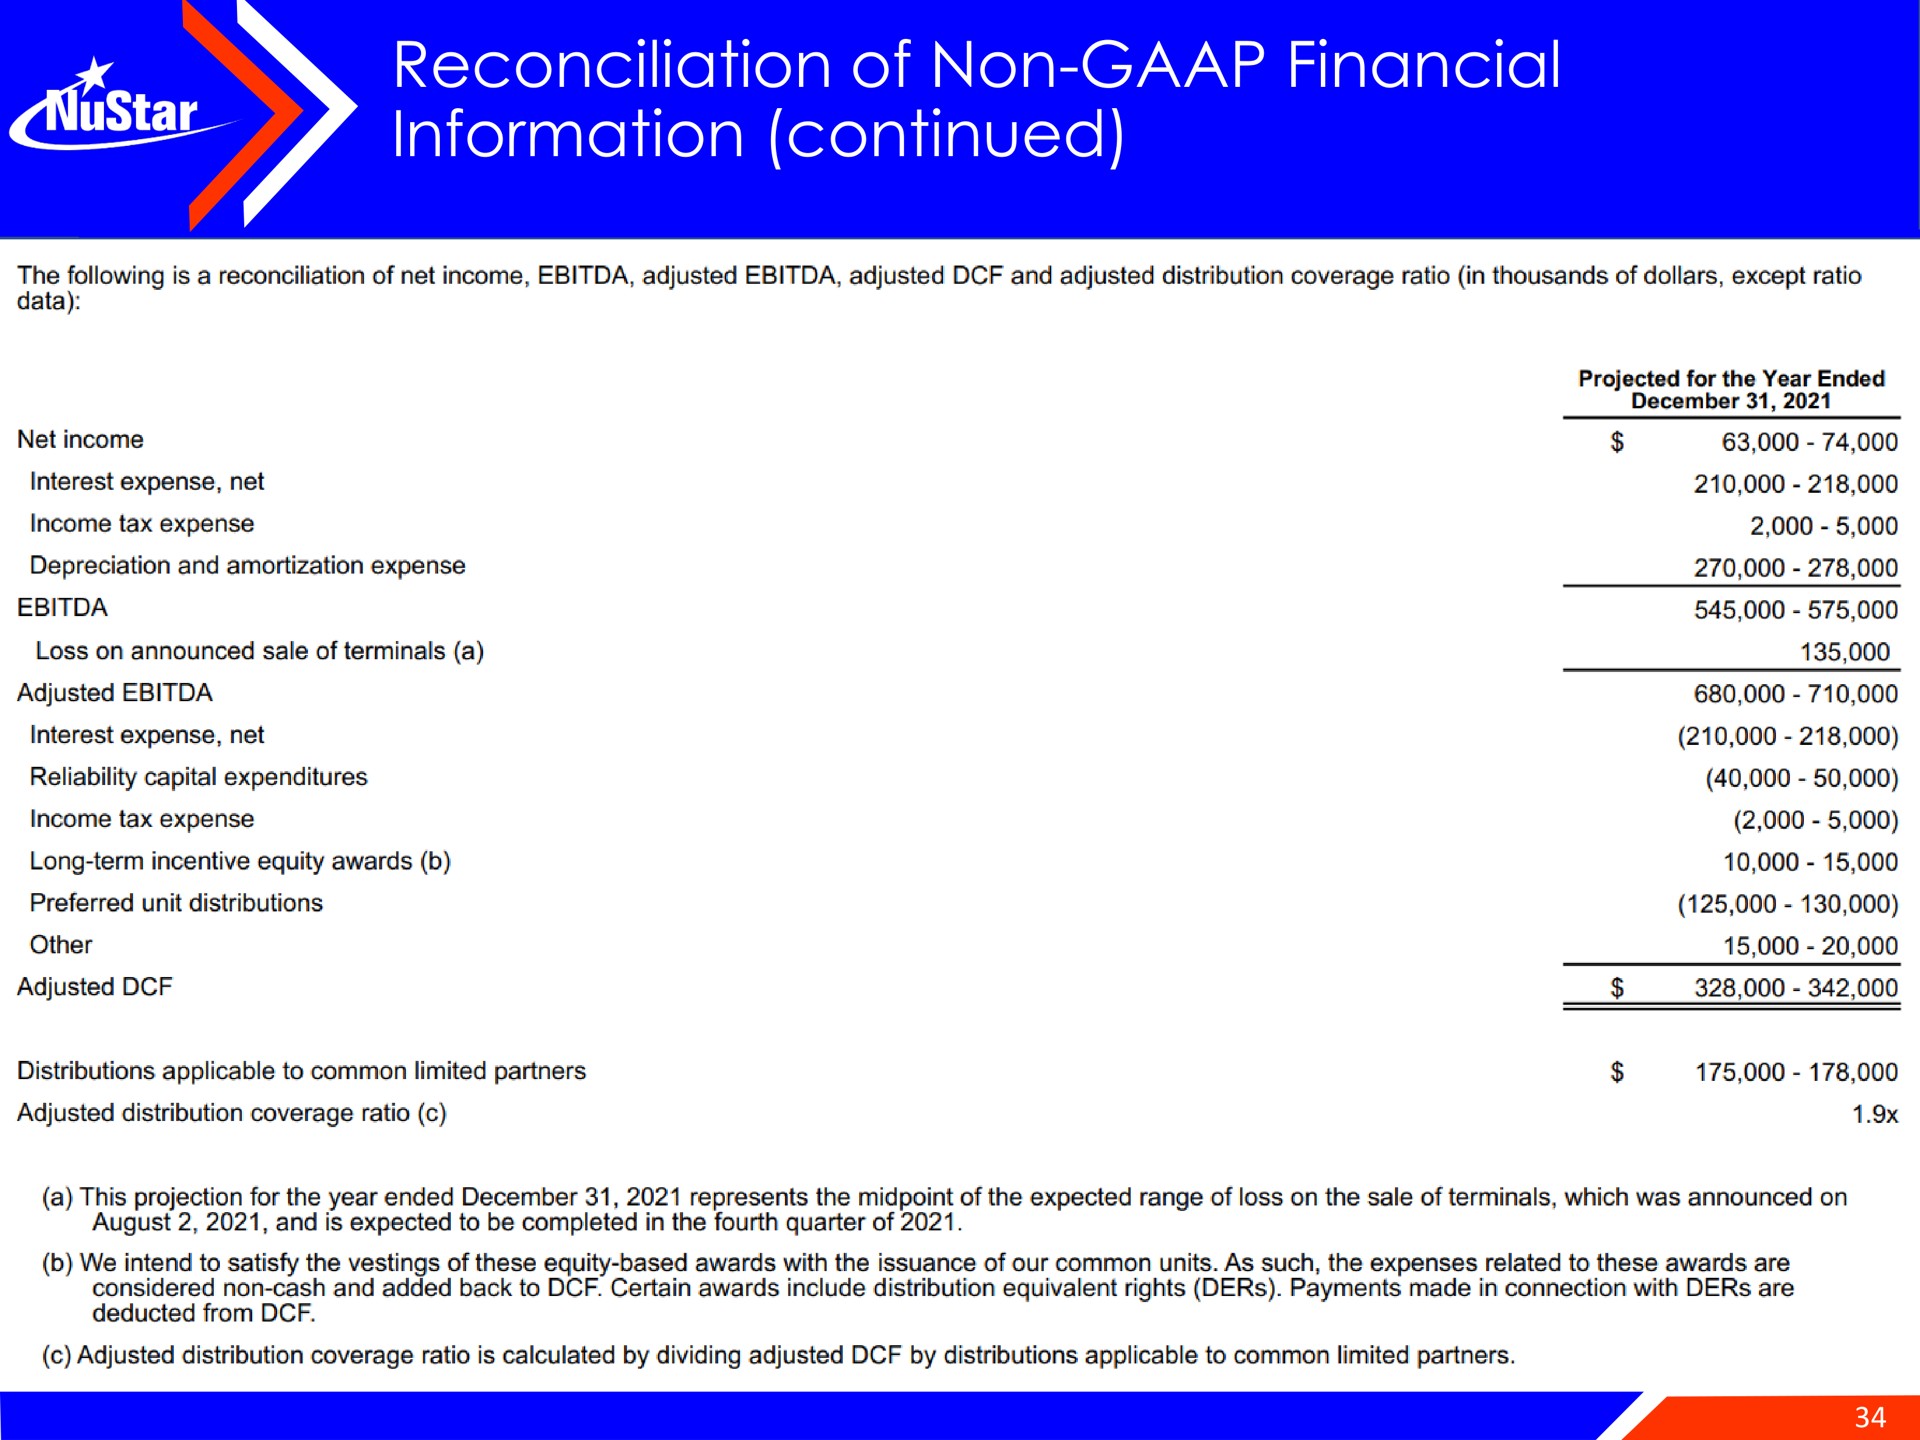 reconciliation of non financial information continued | NuStar Energy